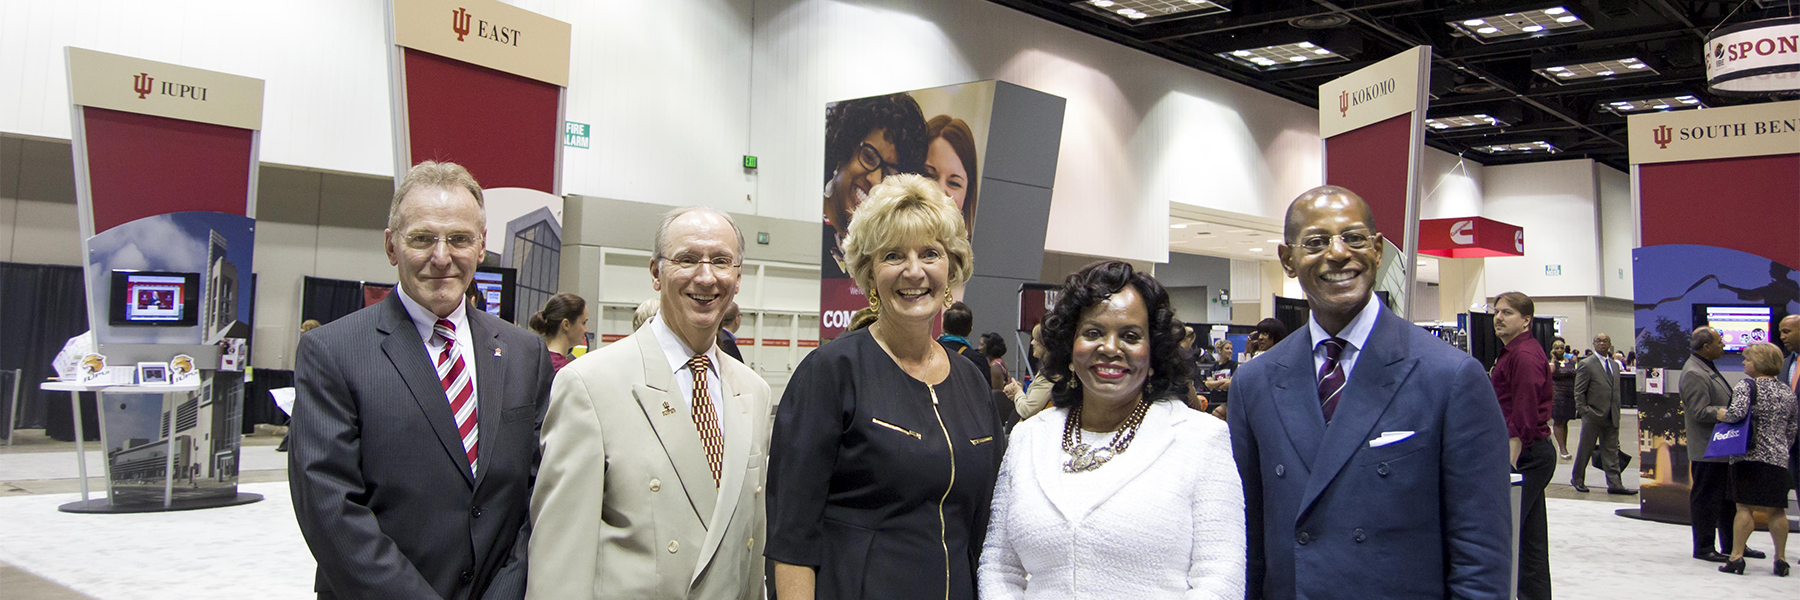 Speakers stand together at the Indiana Black Expo.